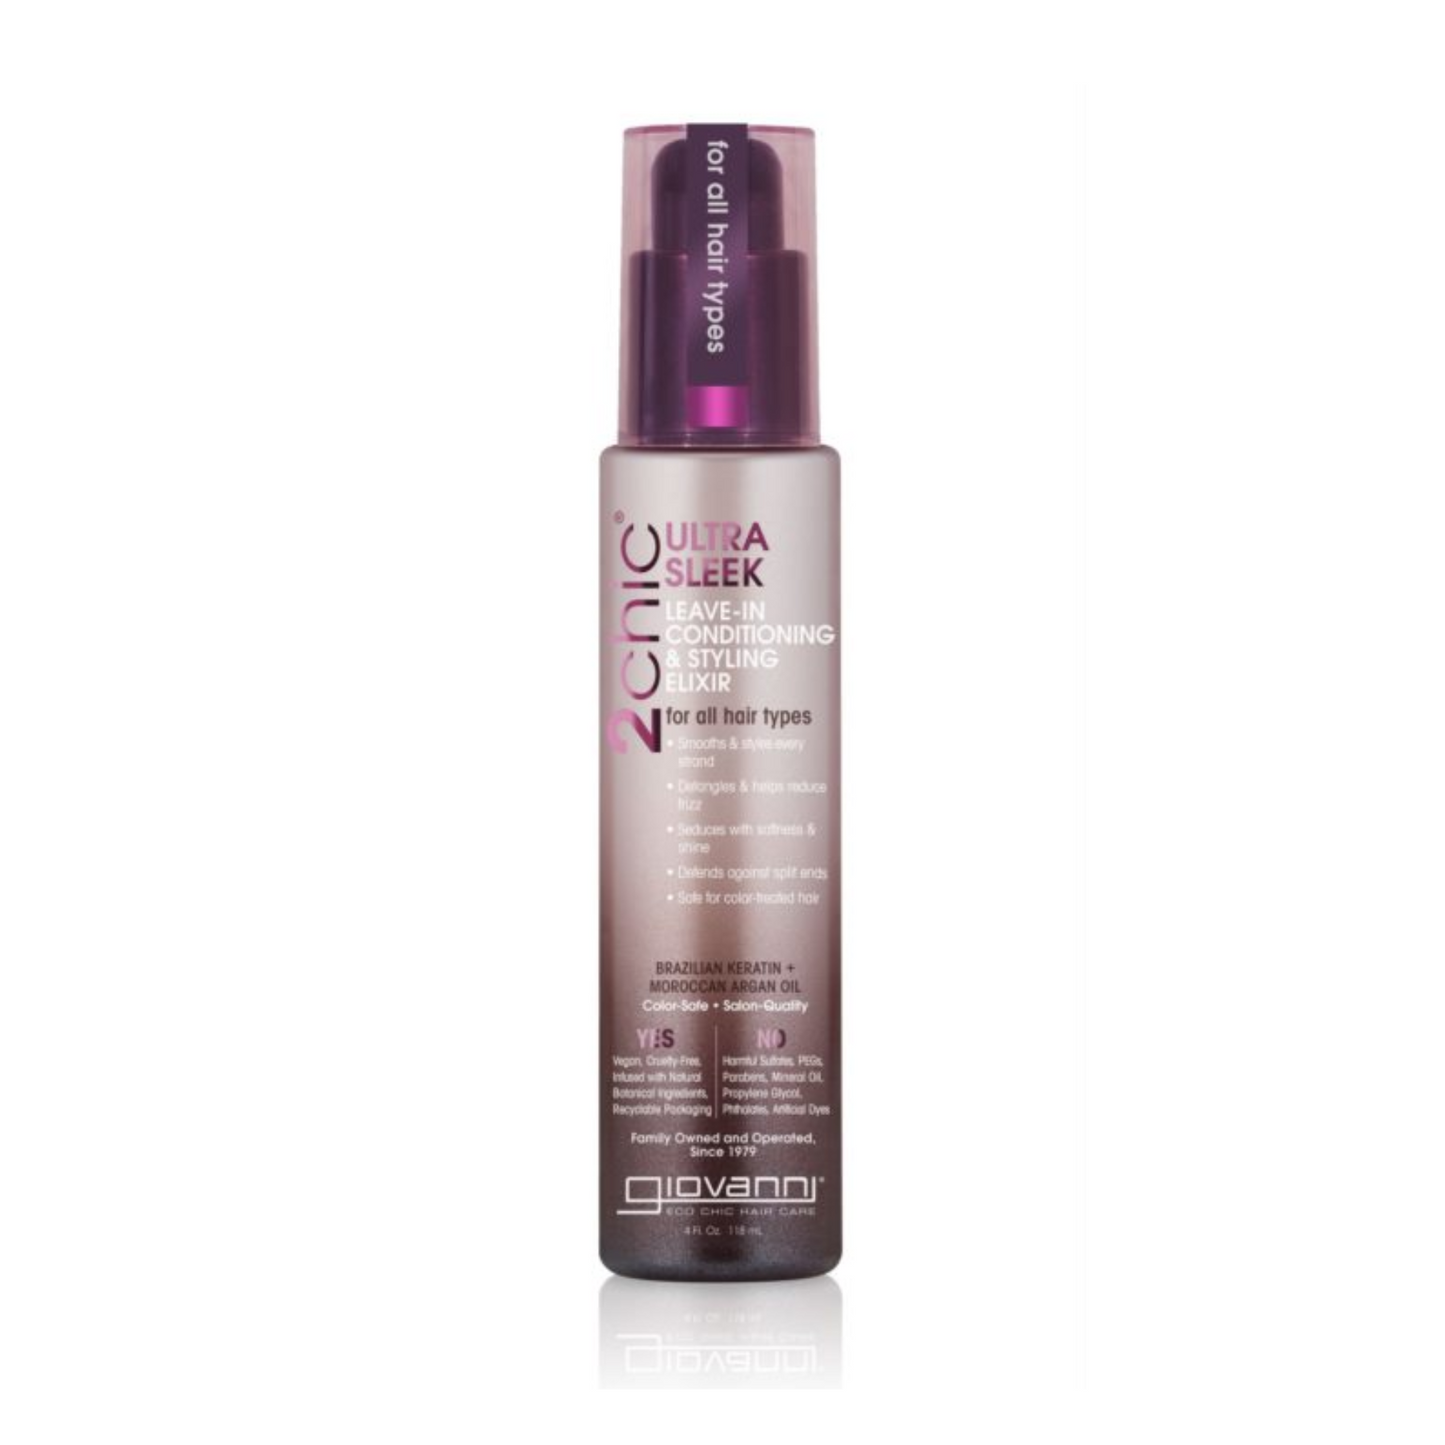 Giovanni 2Chic Ultra Sleek Leave-In Conditioner & Styling Elixir 118mL, For All Hair Types